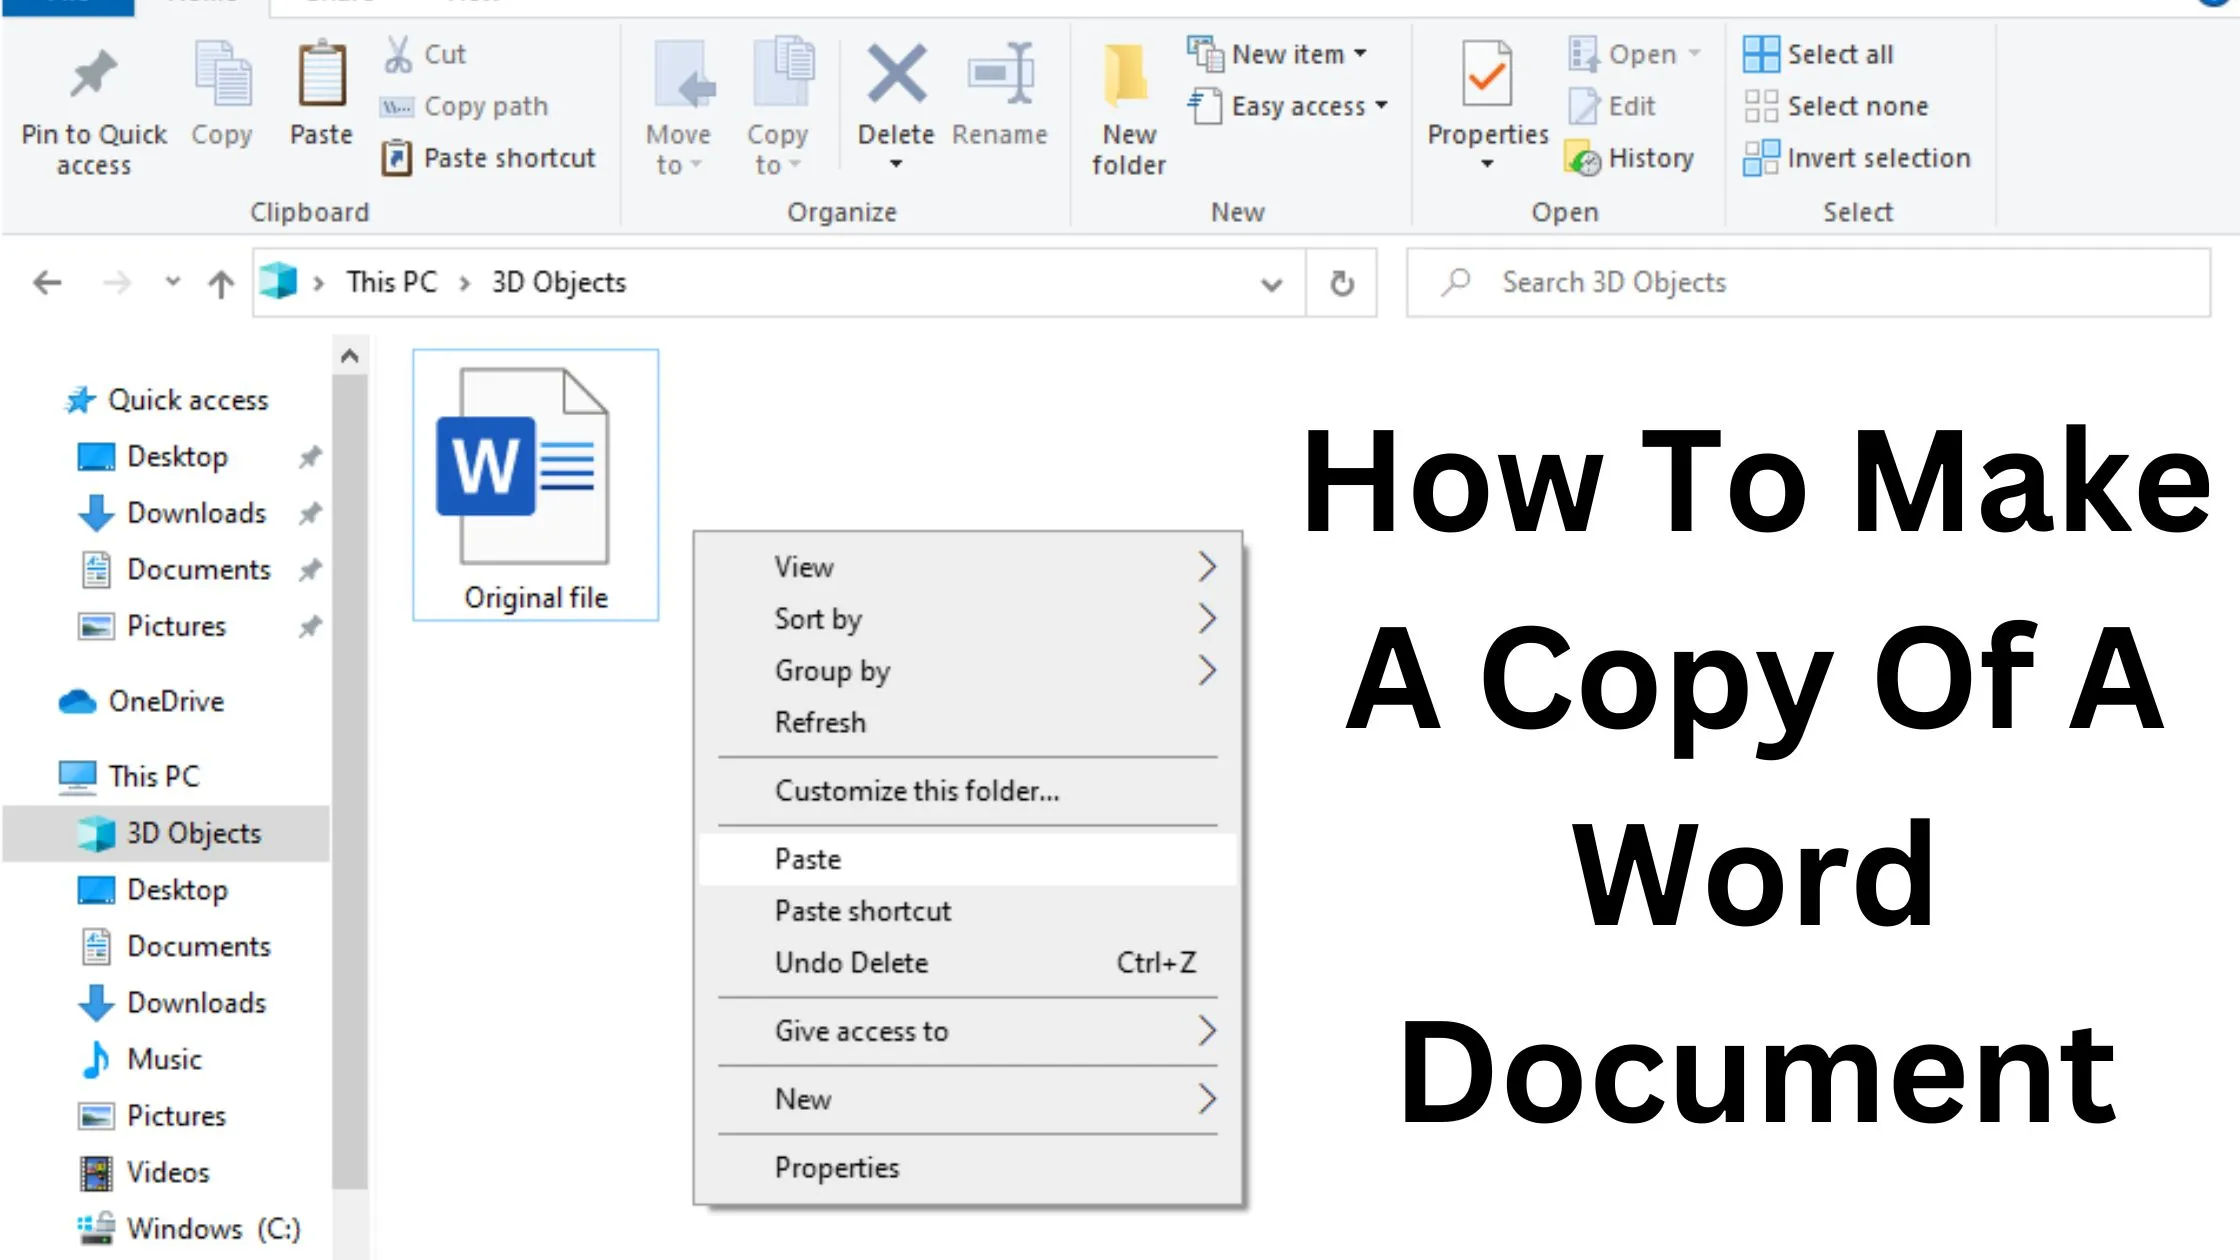 How to make a copy of a word document – A Guide